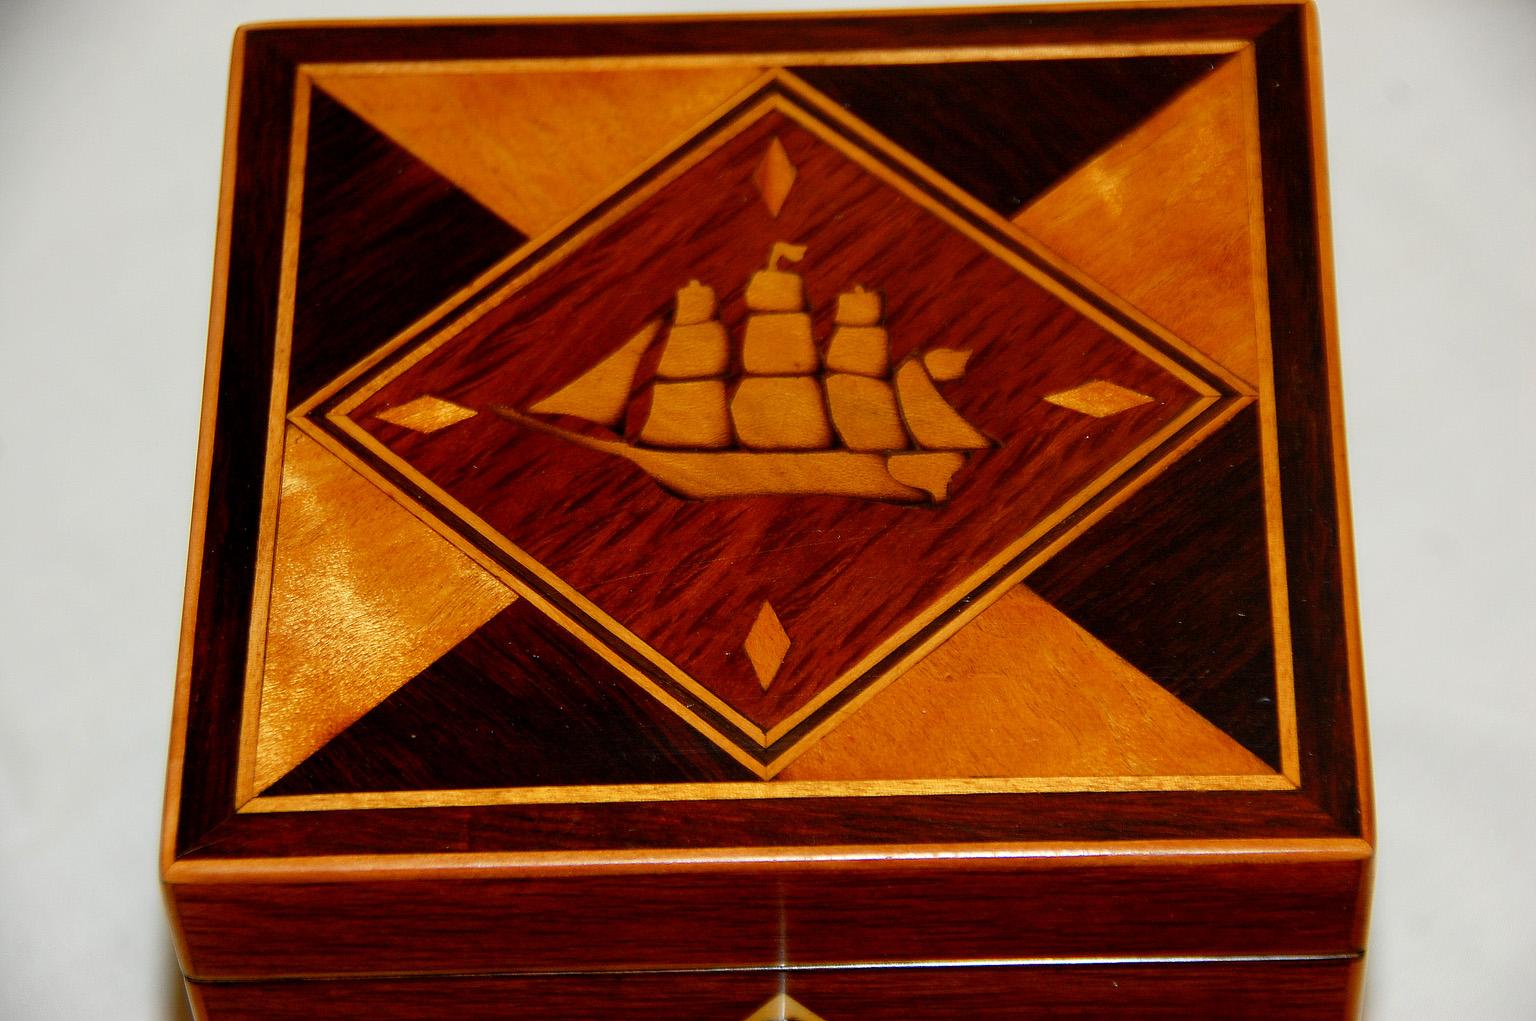 English Early 19th century partridgewood single tea caddy with three masted, square rigged ship inlaid to the lid. The ship is inlaid in shaded boxwood within a partridgewood diamond cartouche with satinwood diamonds in each corner and geometric